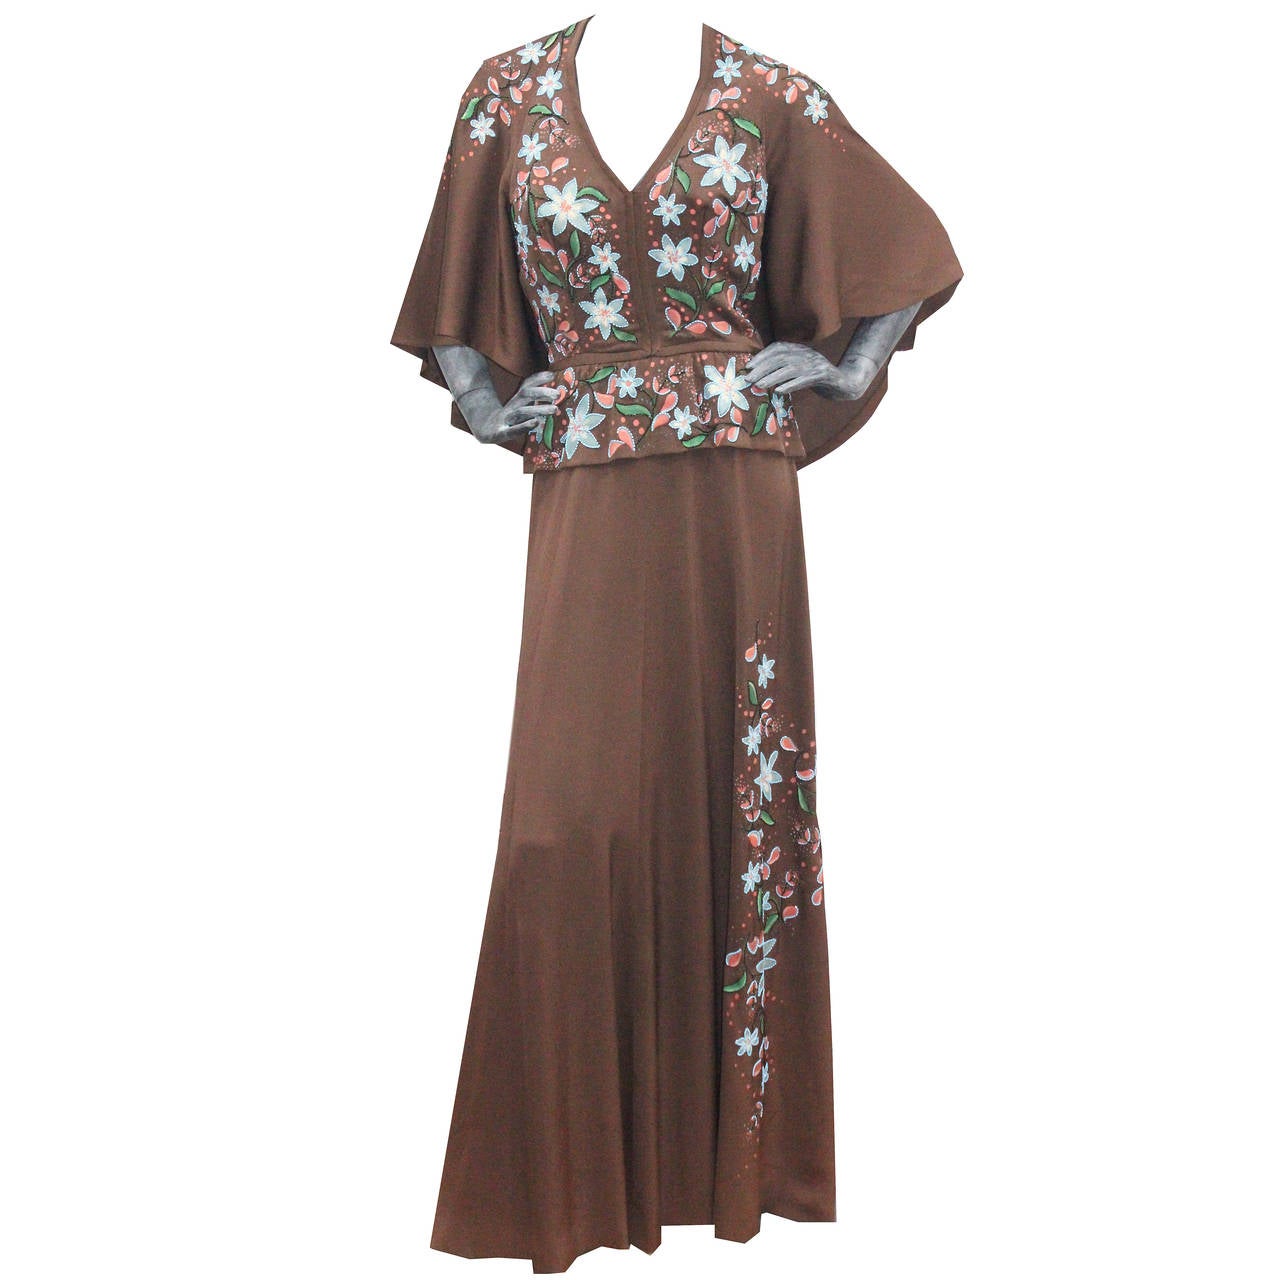 A Rare Couture Early 1970s Hand Painted Cape Gown  by Douglas Darnell